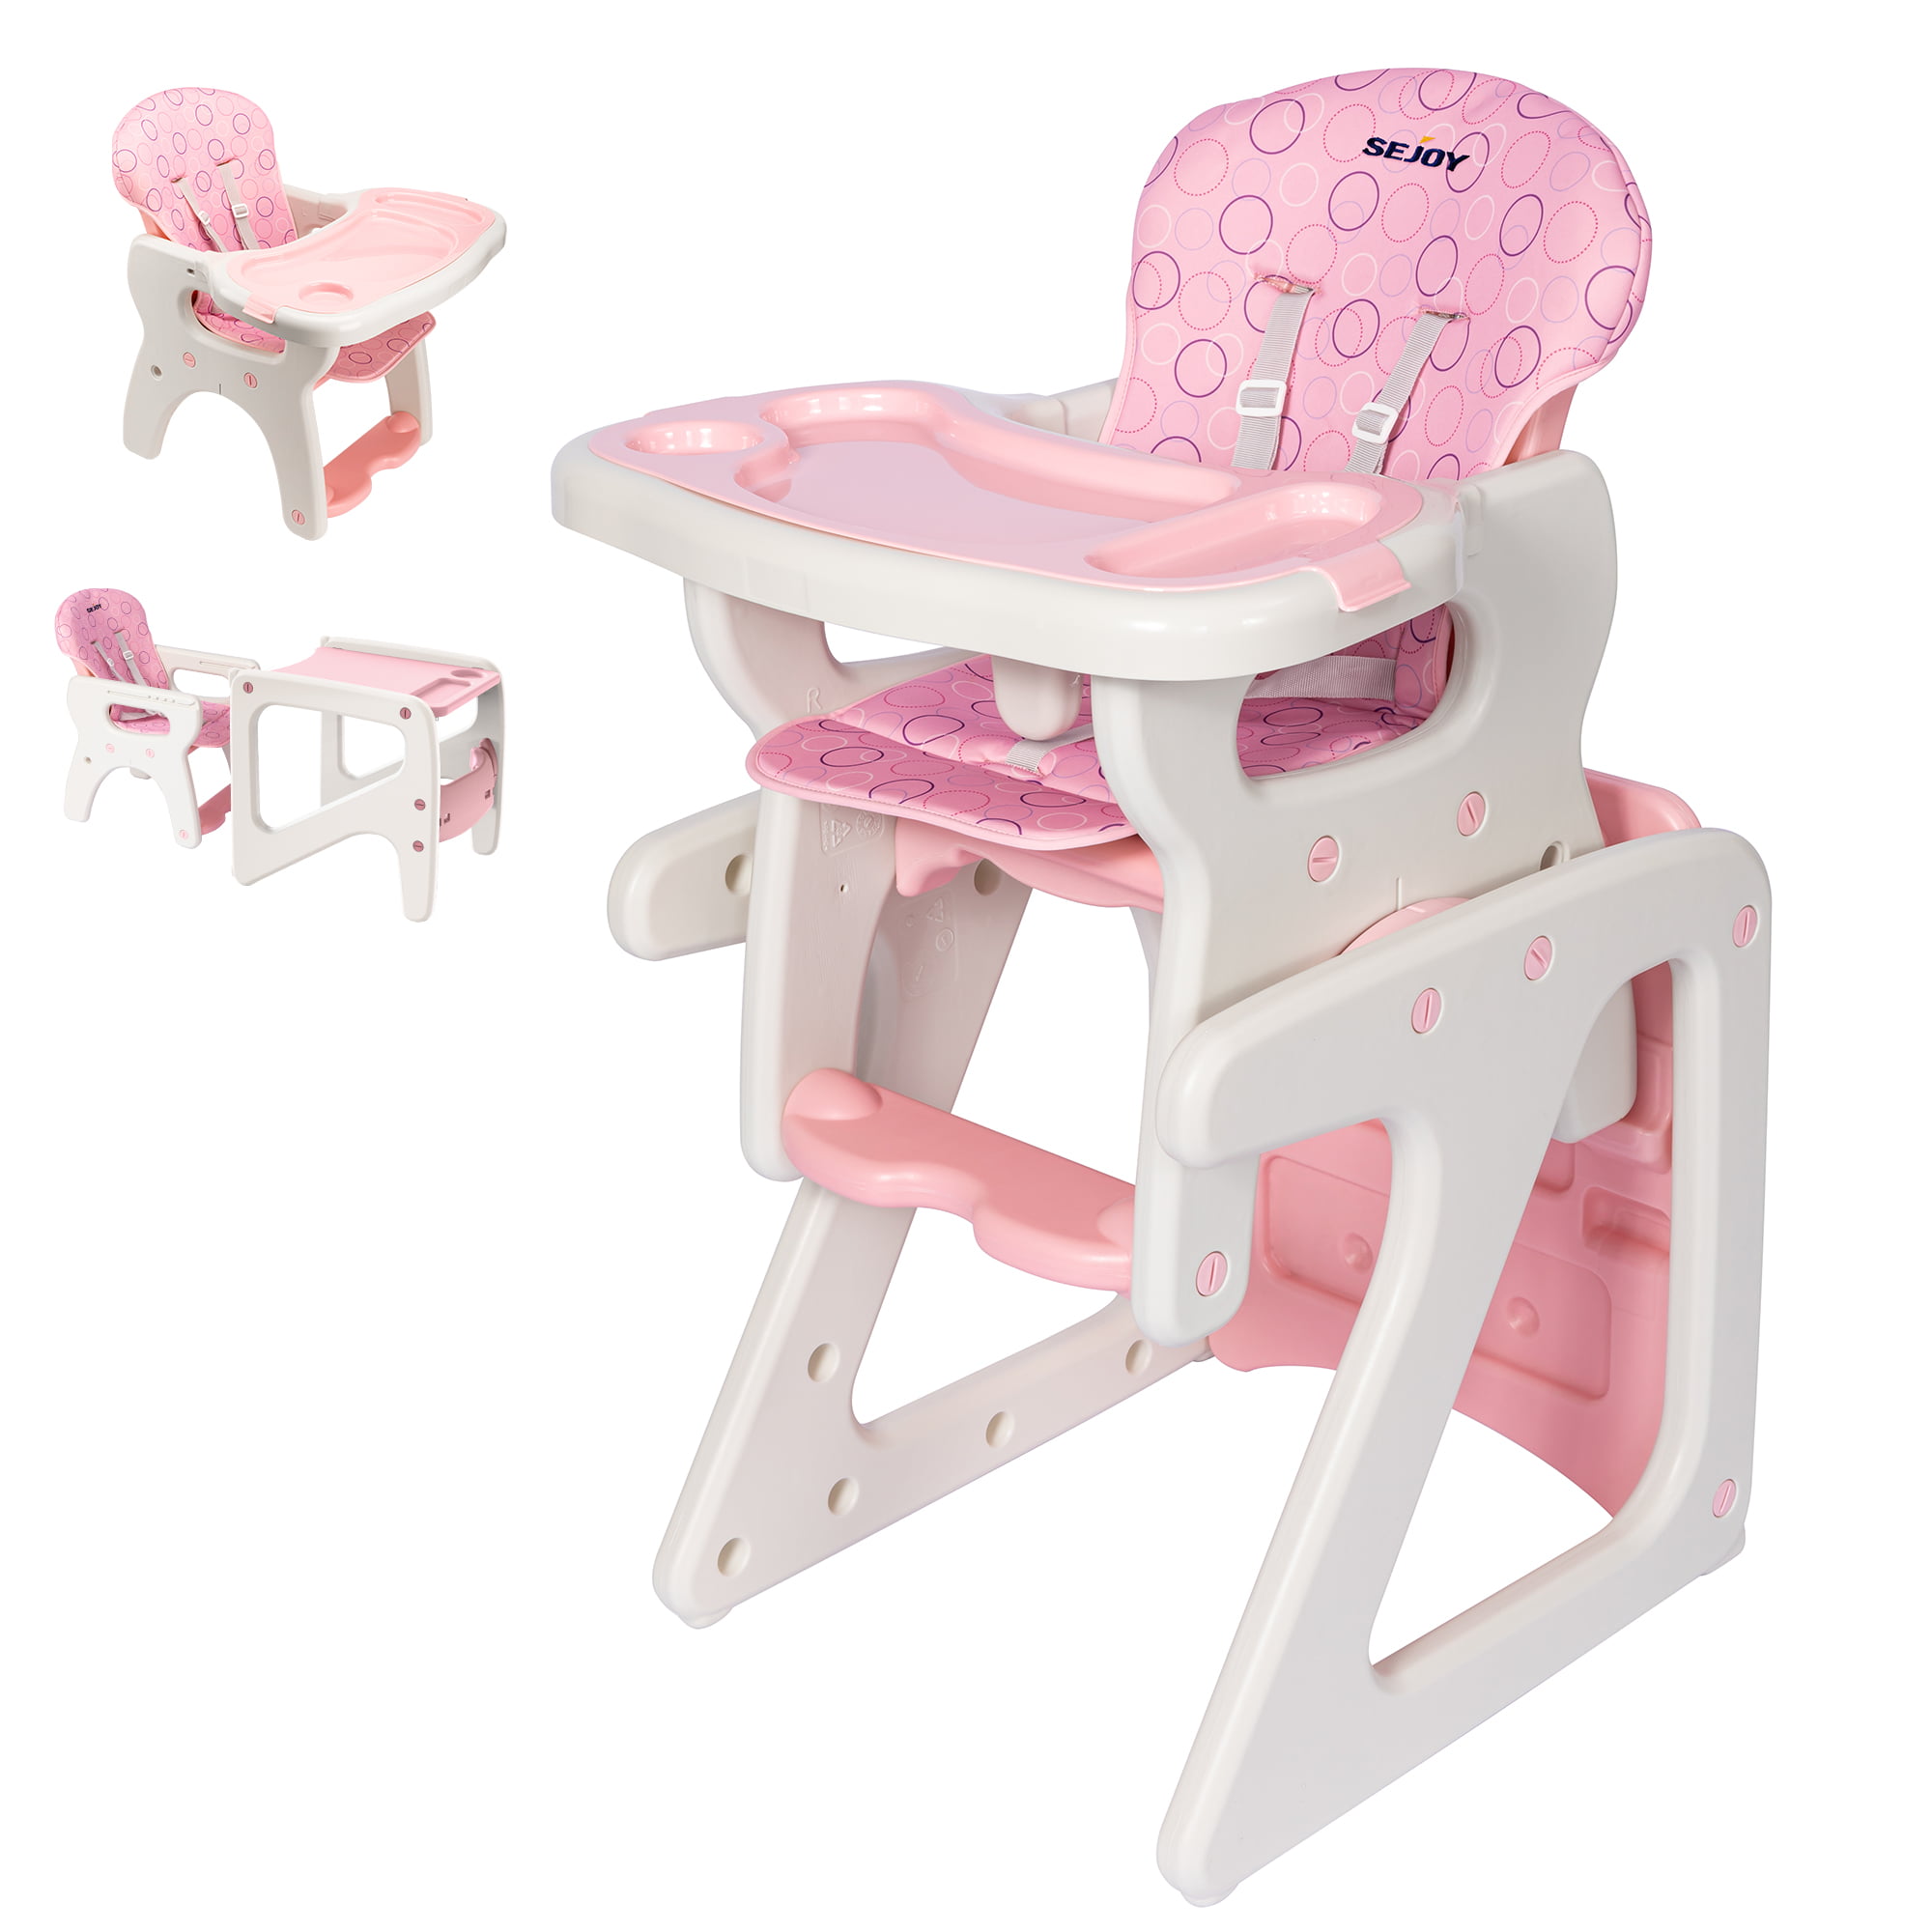 Convertible High Chair and Play Table for Babies